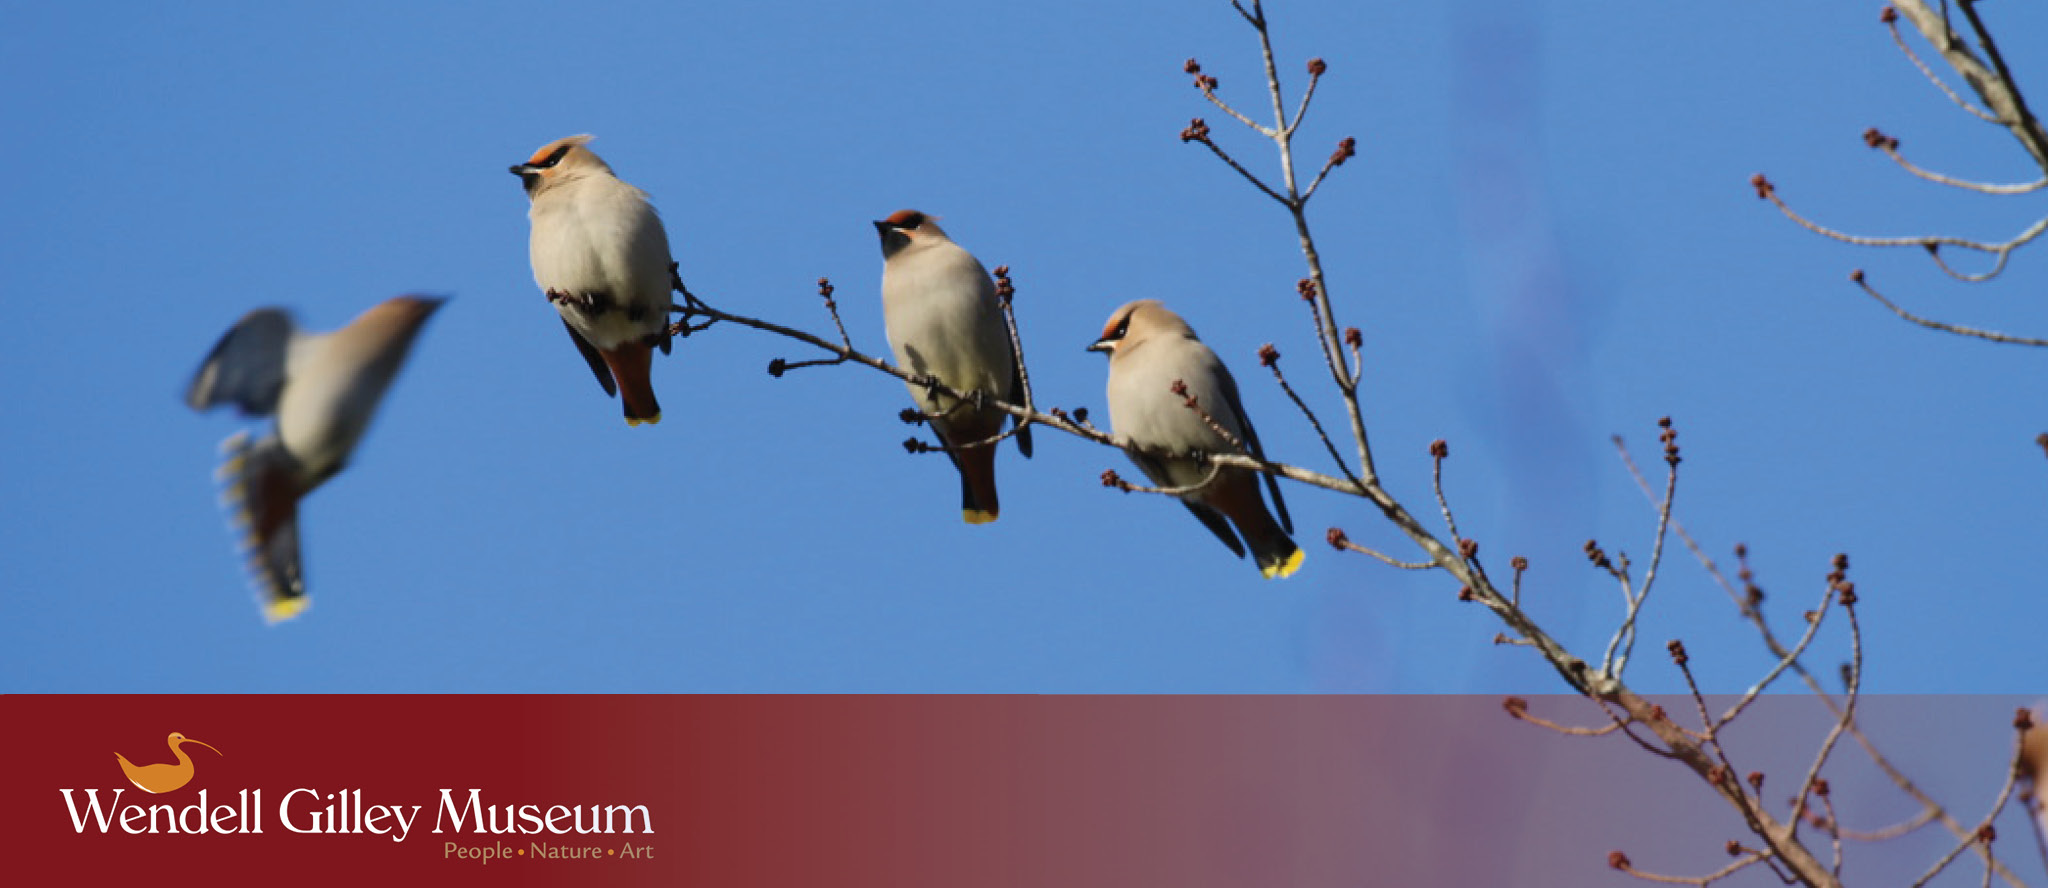 A Bohemian waxwing joining the flock of three, sitting on a tree branch against a blue sky.